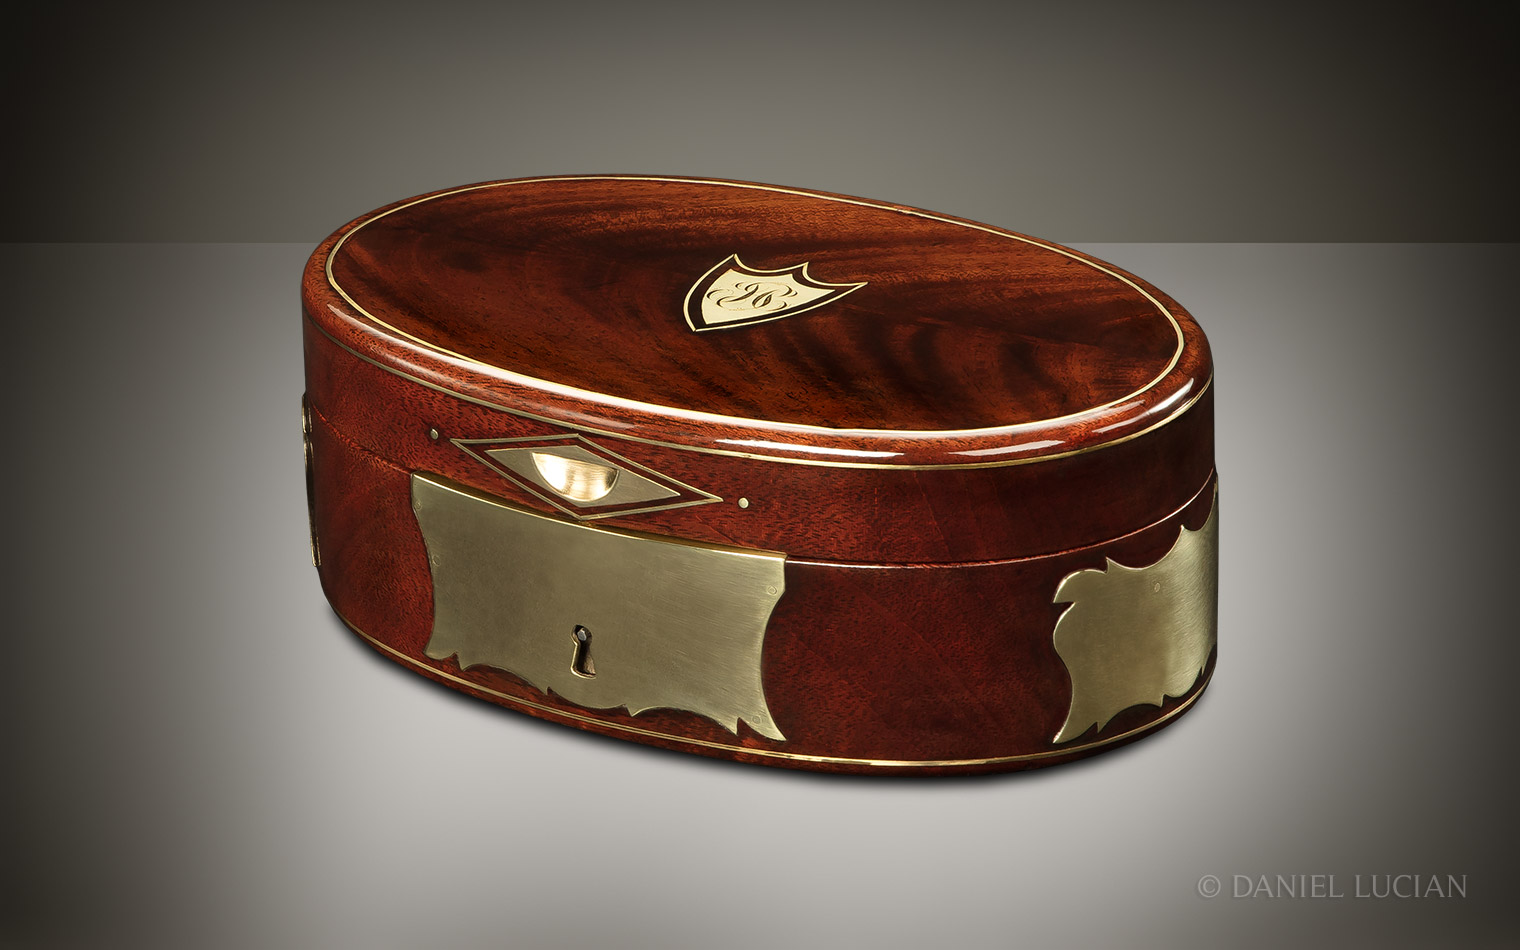 Miniature French Antique Jewellery Box in Cuban Mahogany, Attributed to Pierre-Dominique Maire